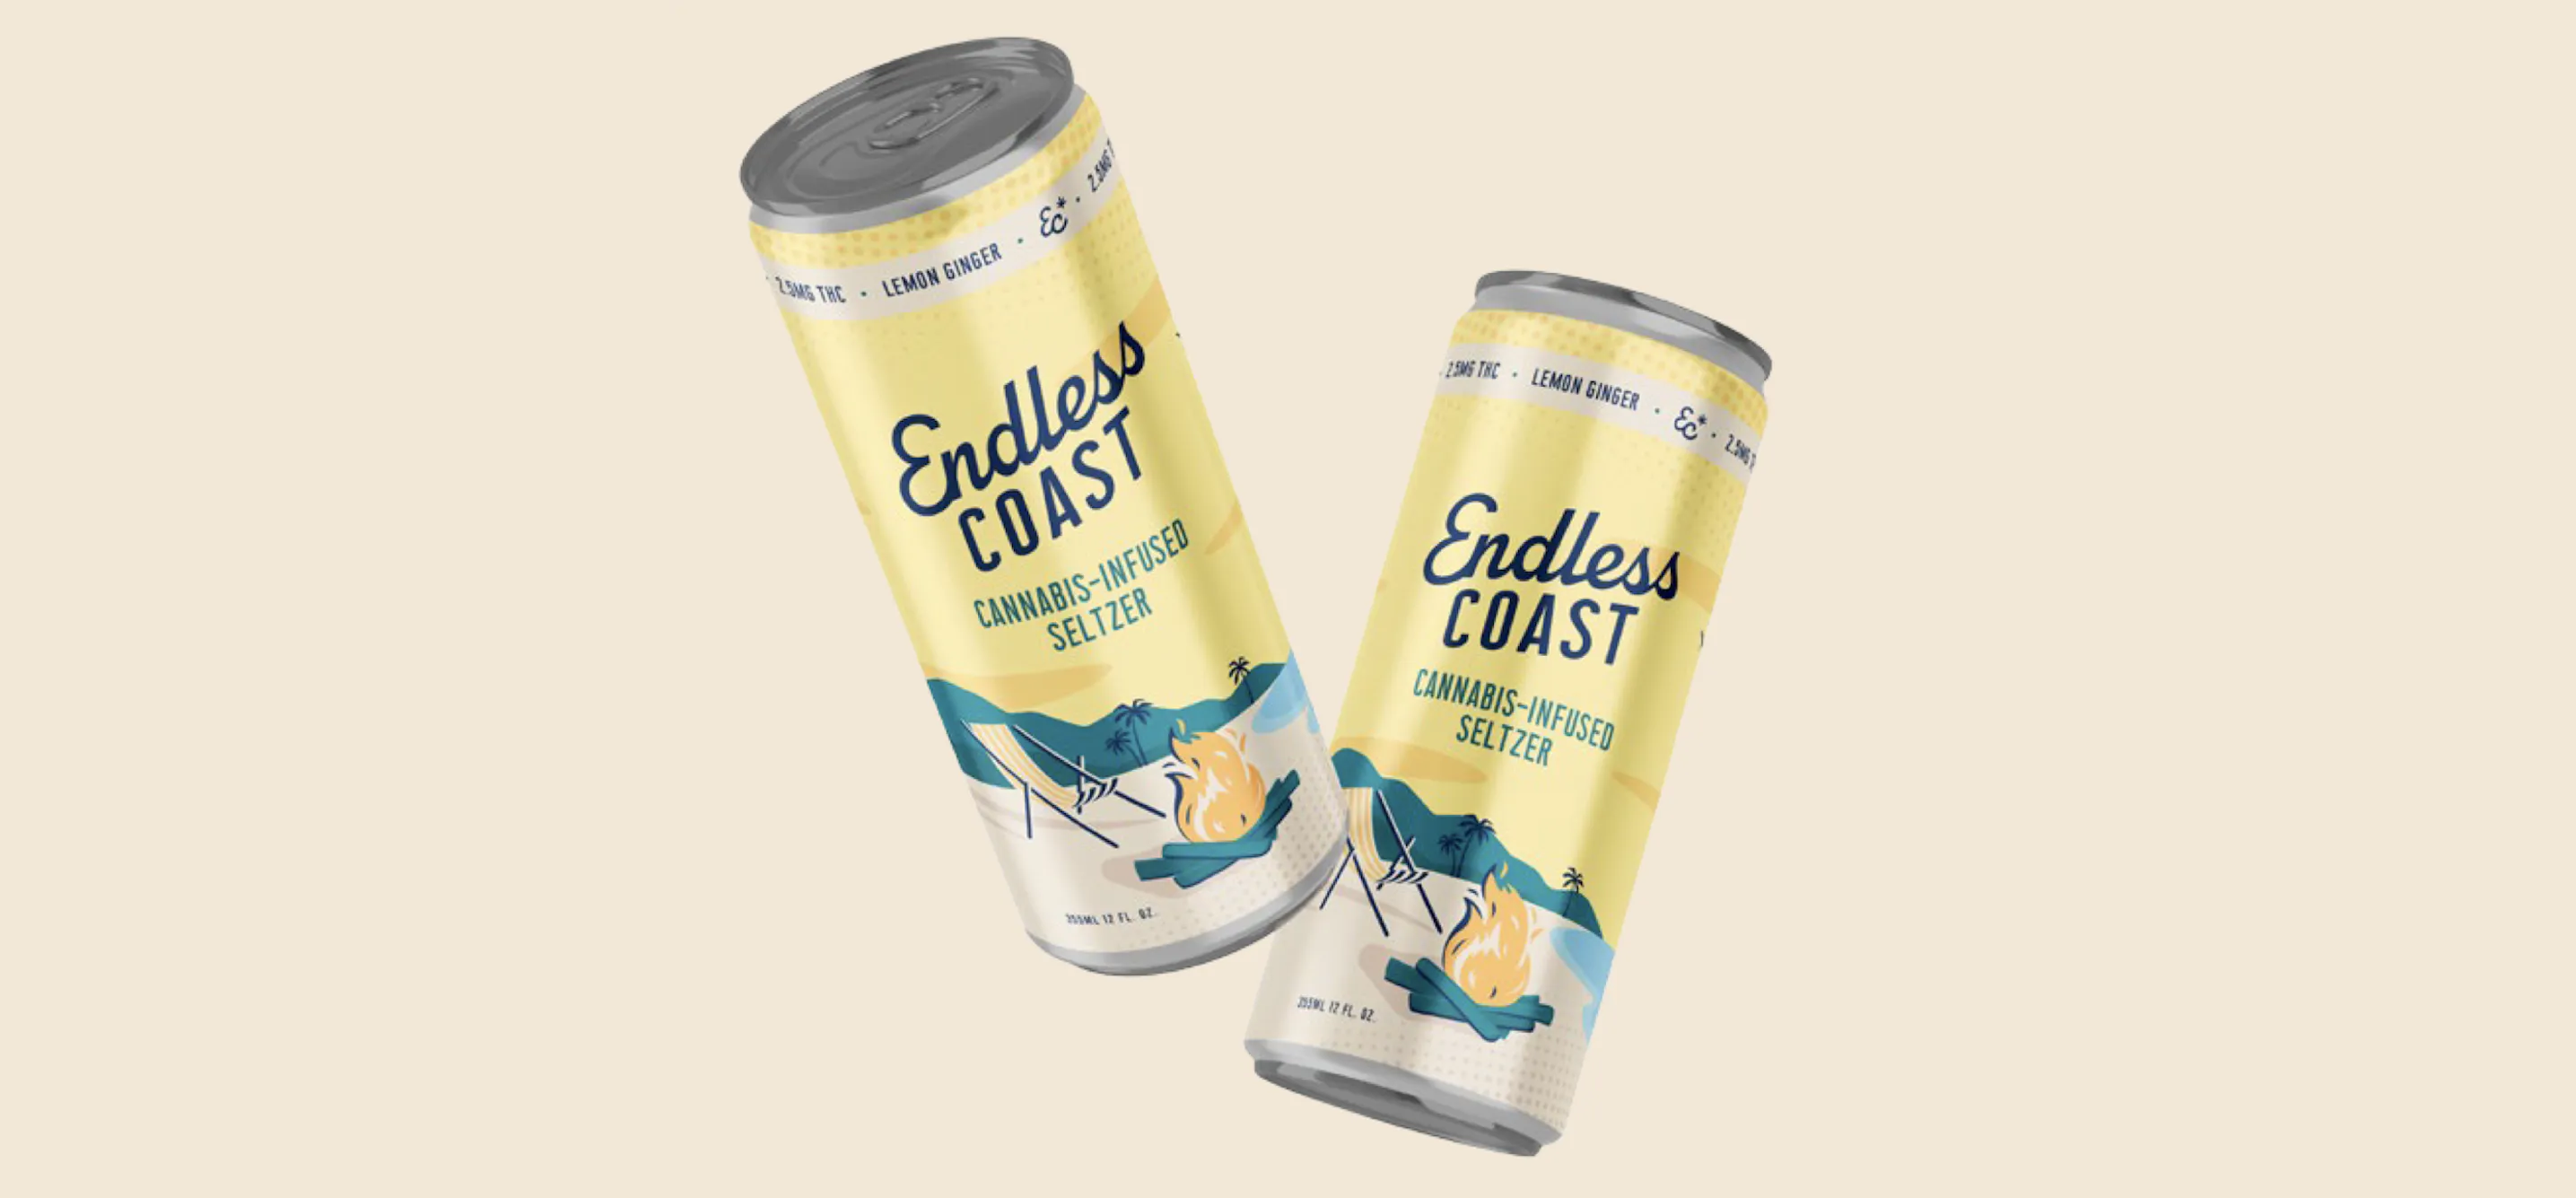 Curaleaf Introduces Endless Coast Cannabis-Infused Seltzers in Massachusetts